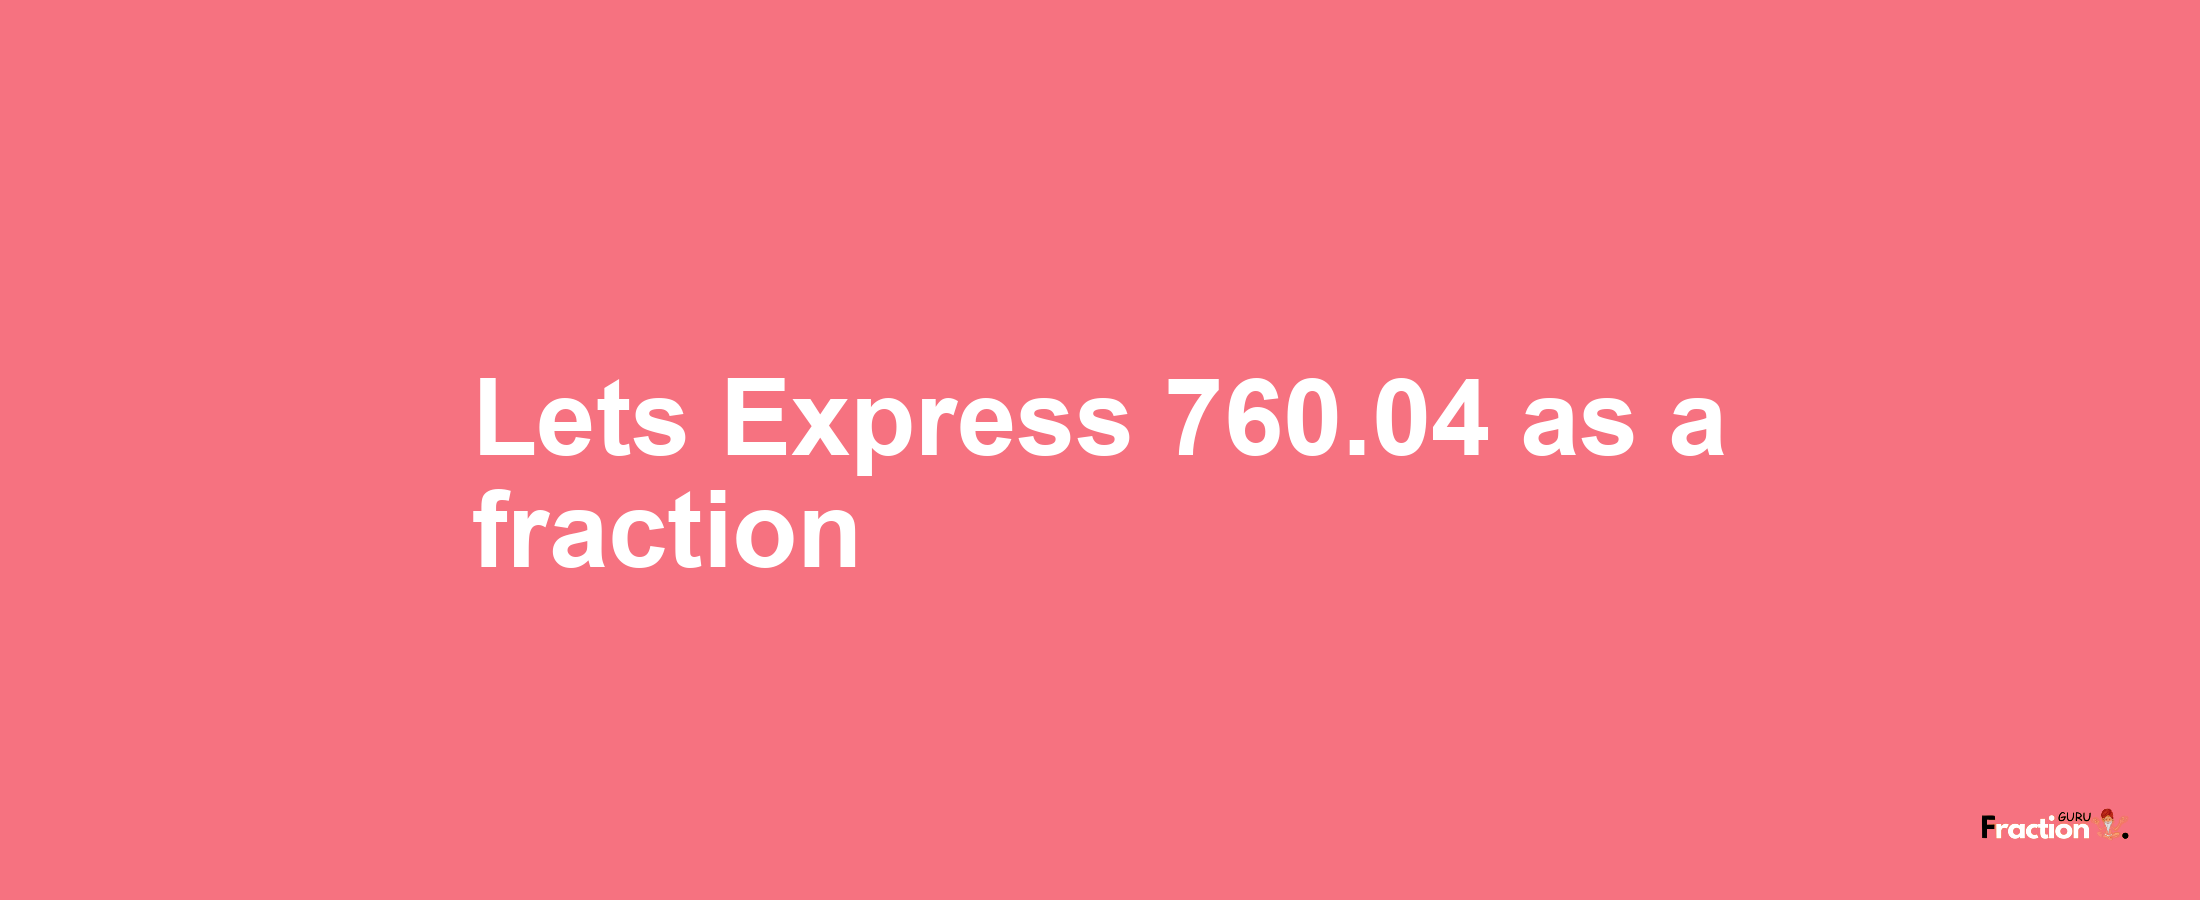 Lets Express 760.04 as afraction